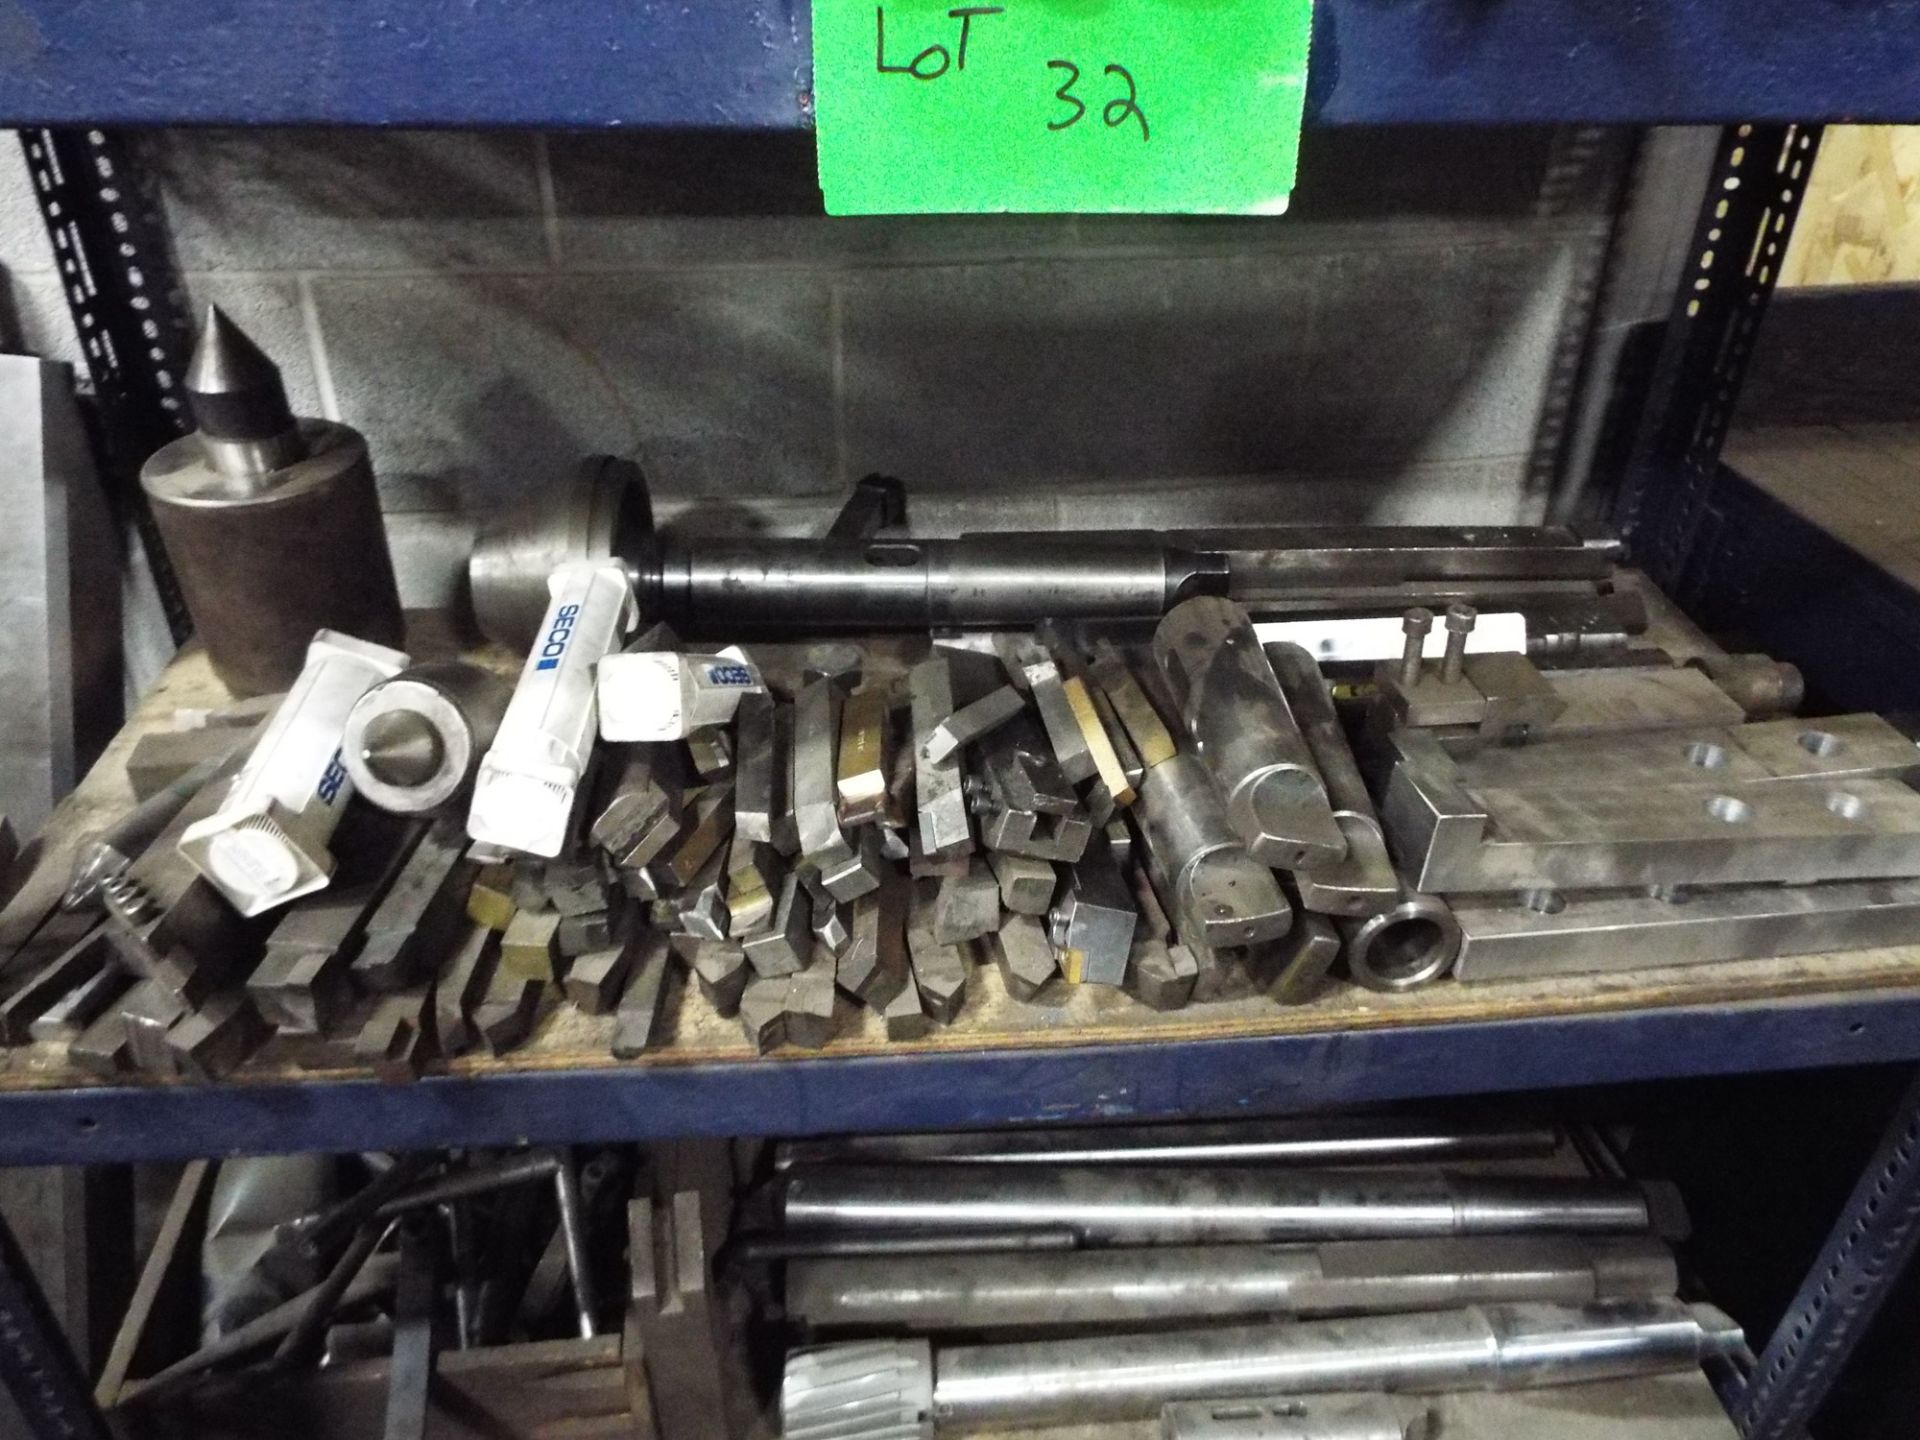 LOT/ SIRCO TOOLING INCLUDING BORING BARS, CENTERS AND REAMERS, S/N: N/A - Image 3 of 6